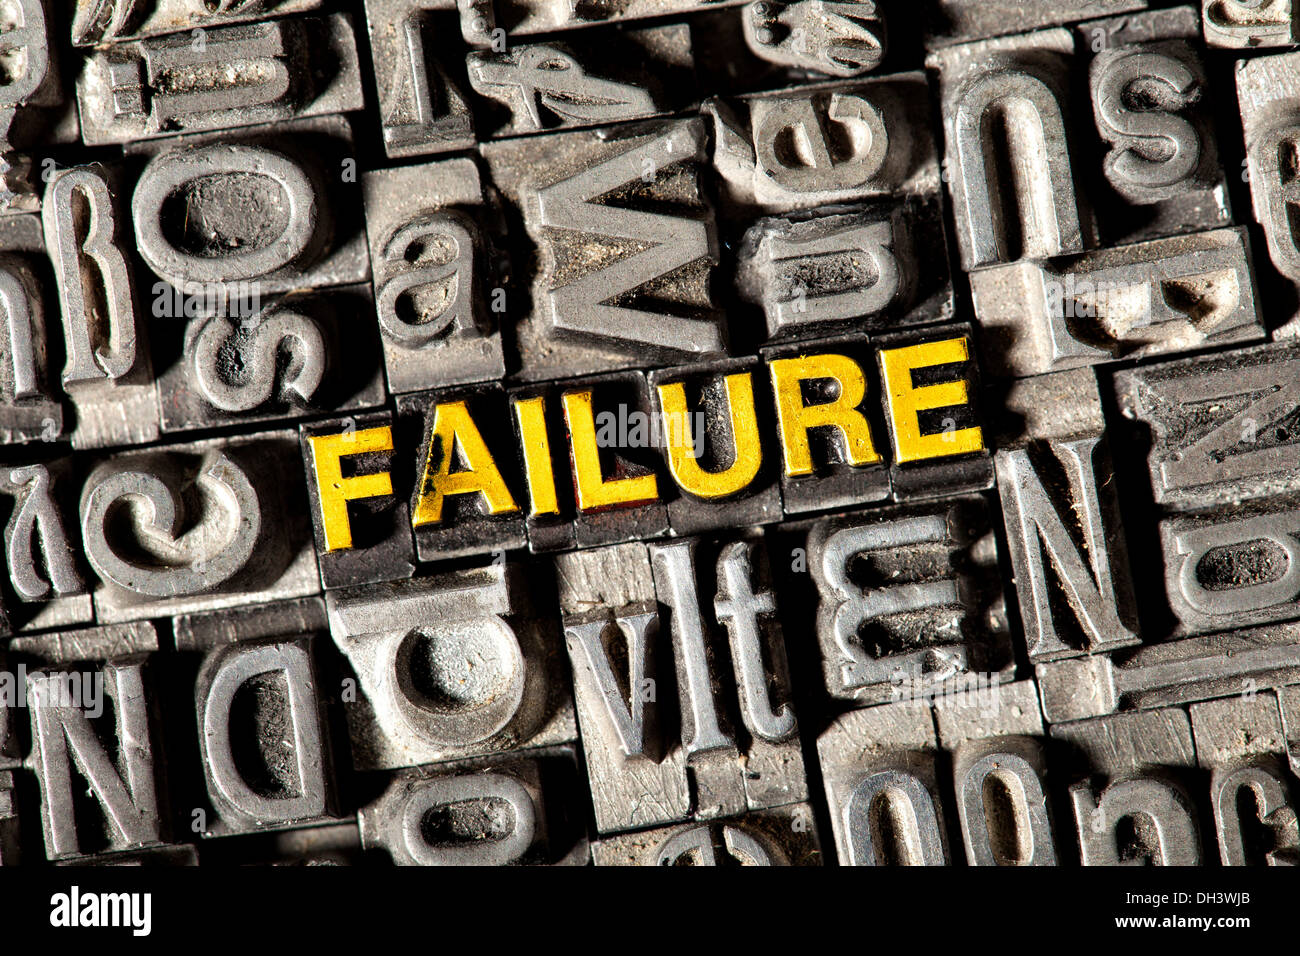 Old lead letters forming the word Failure Stock Photo